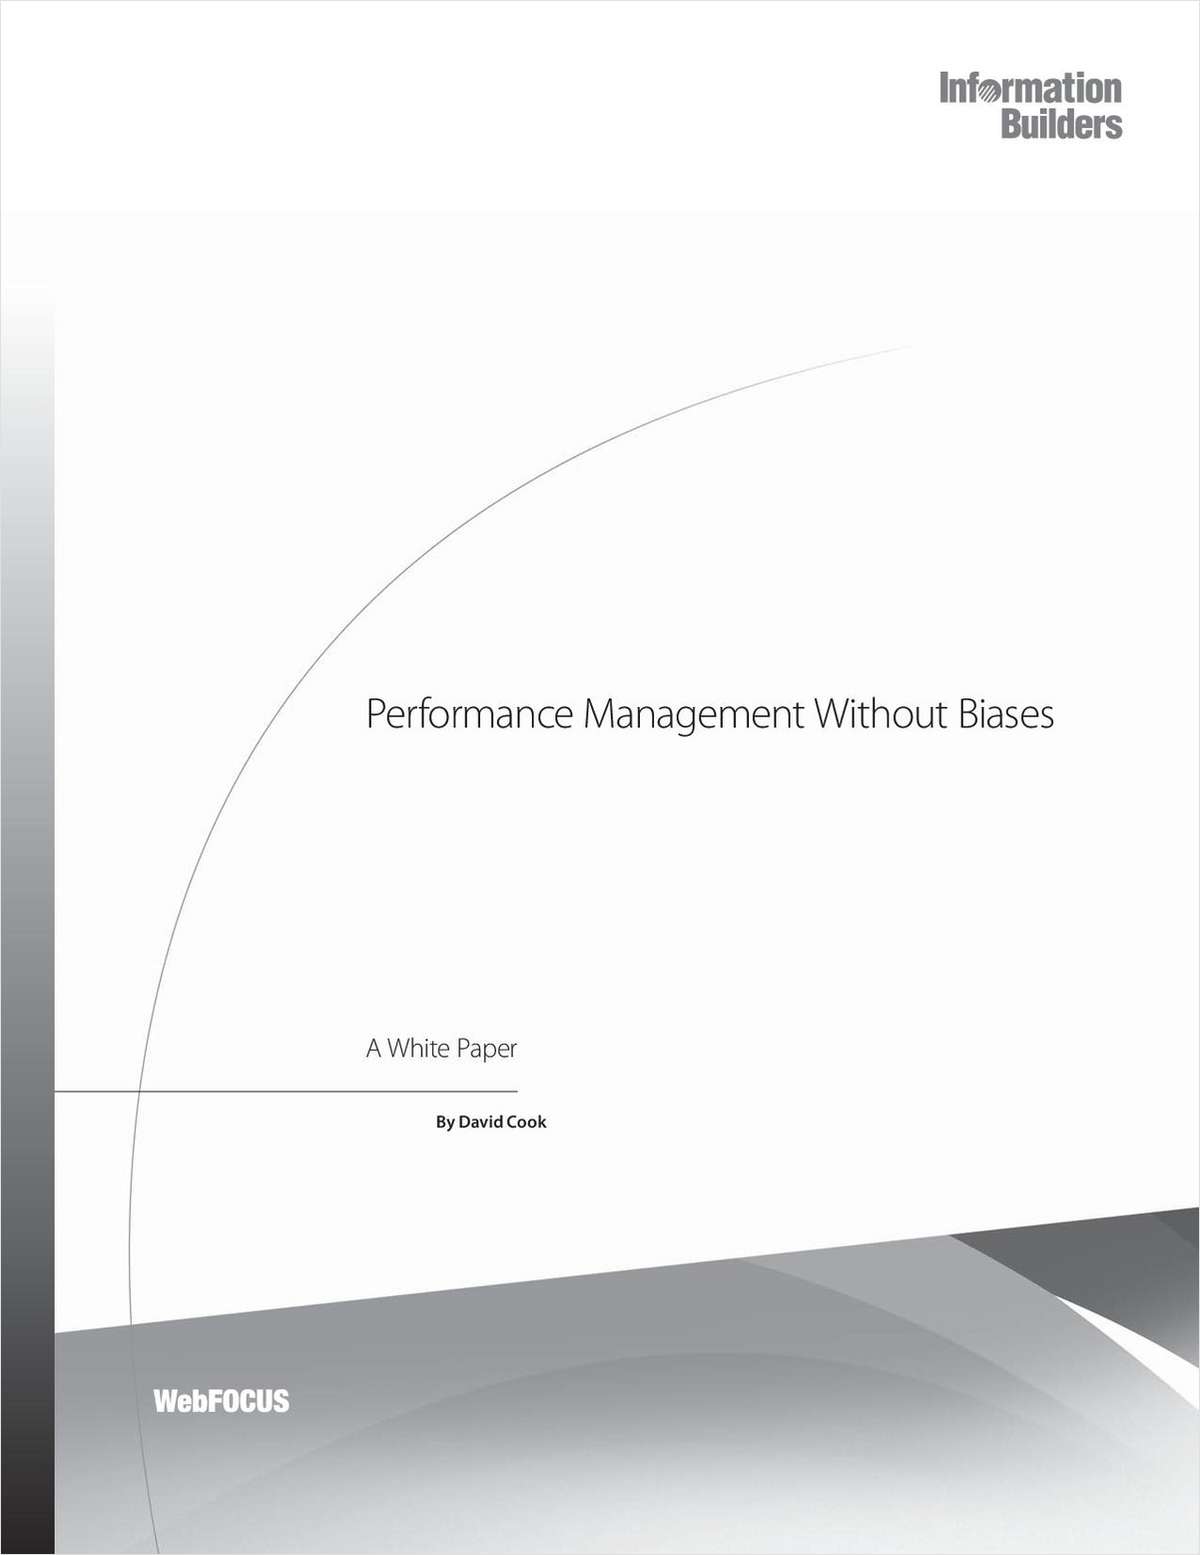 Performance Management Without Biases